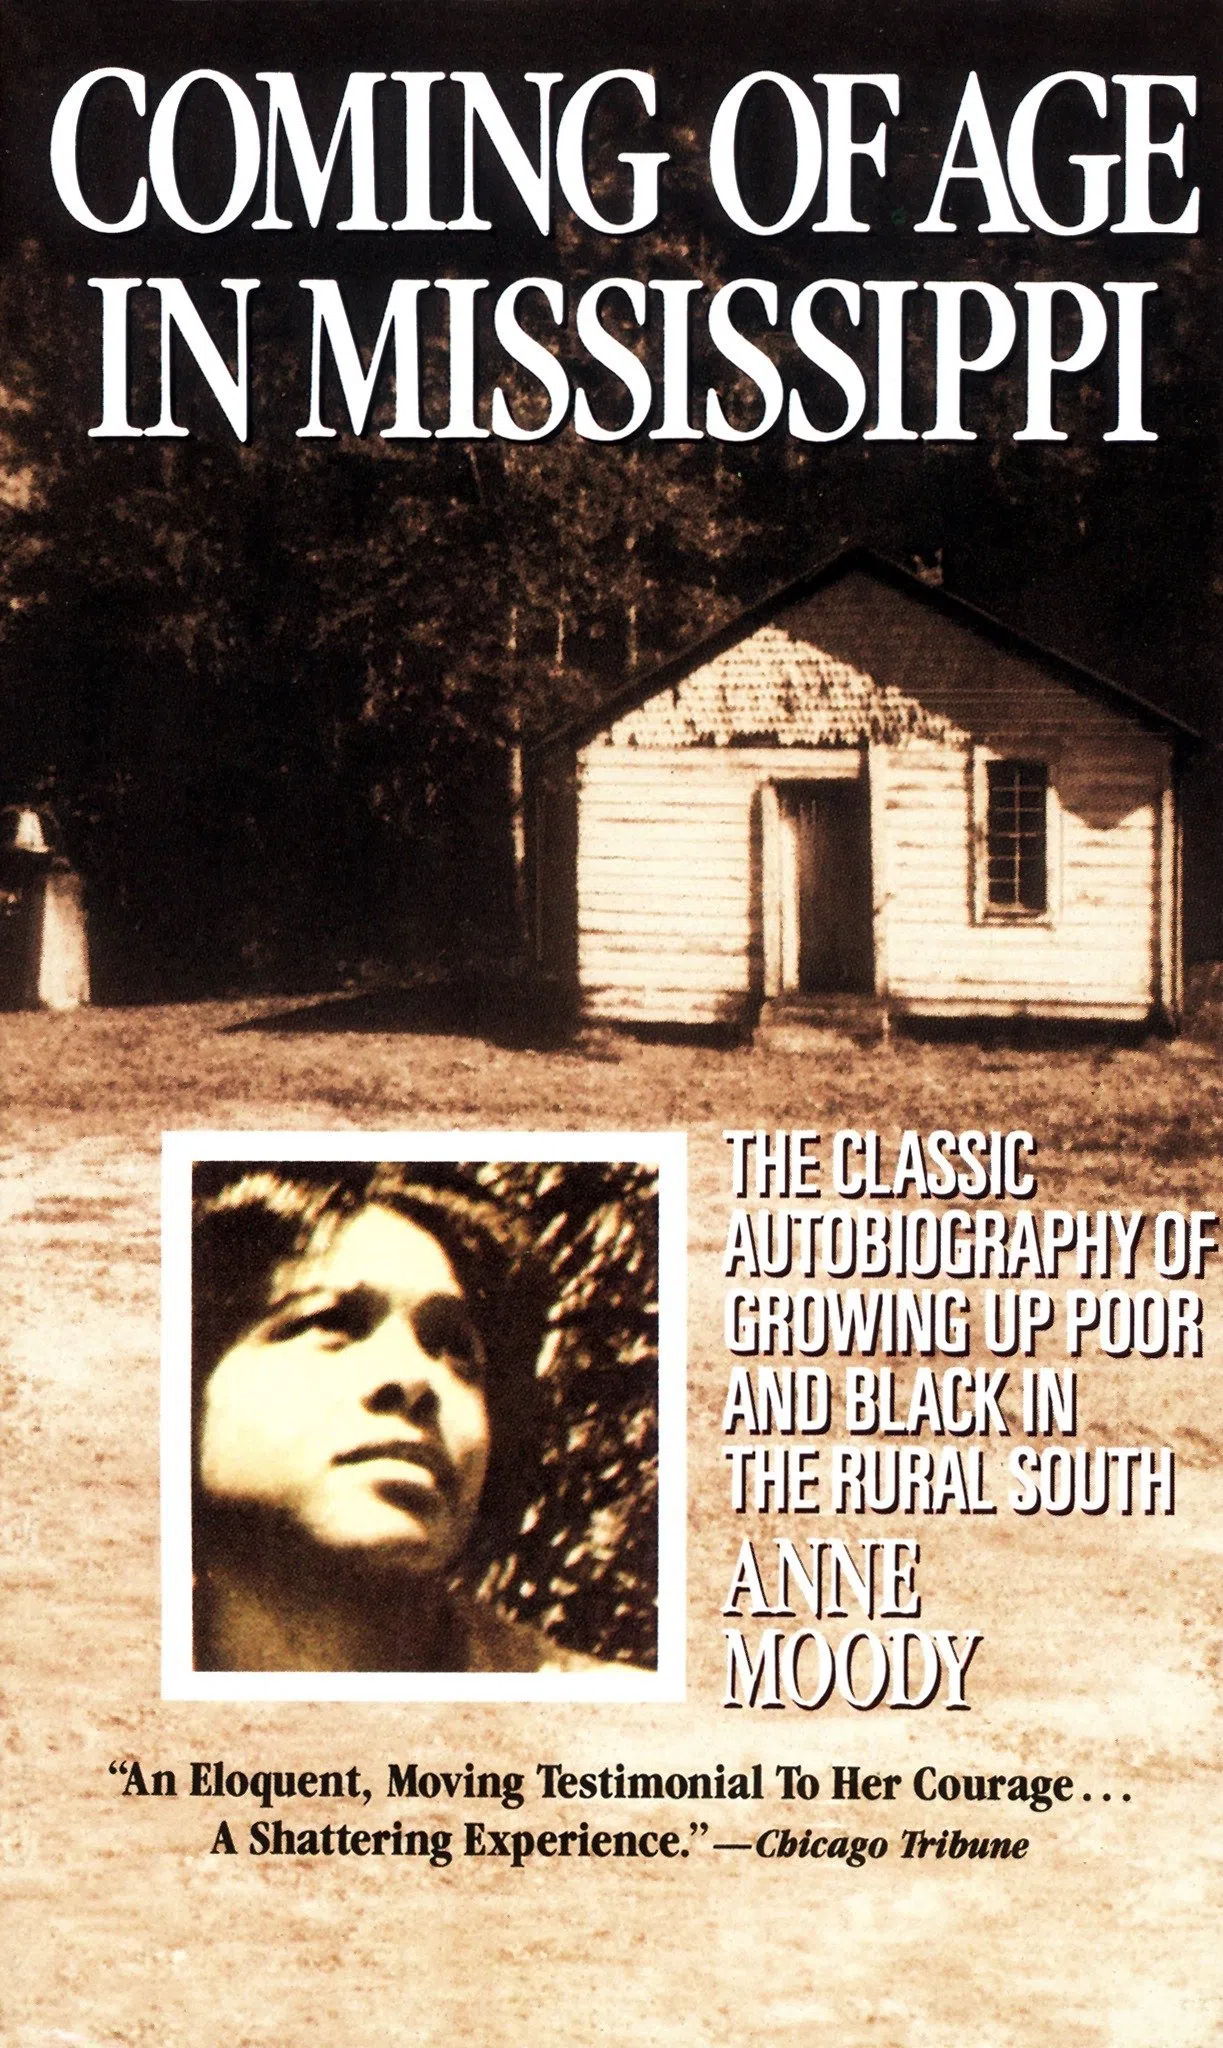 Civil rights pioneer Anne Moody to be part of  the Mississippi Freedom Trail